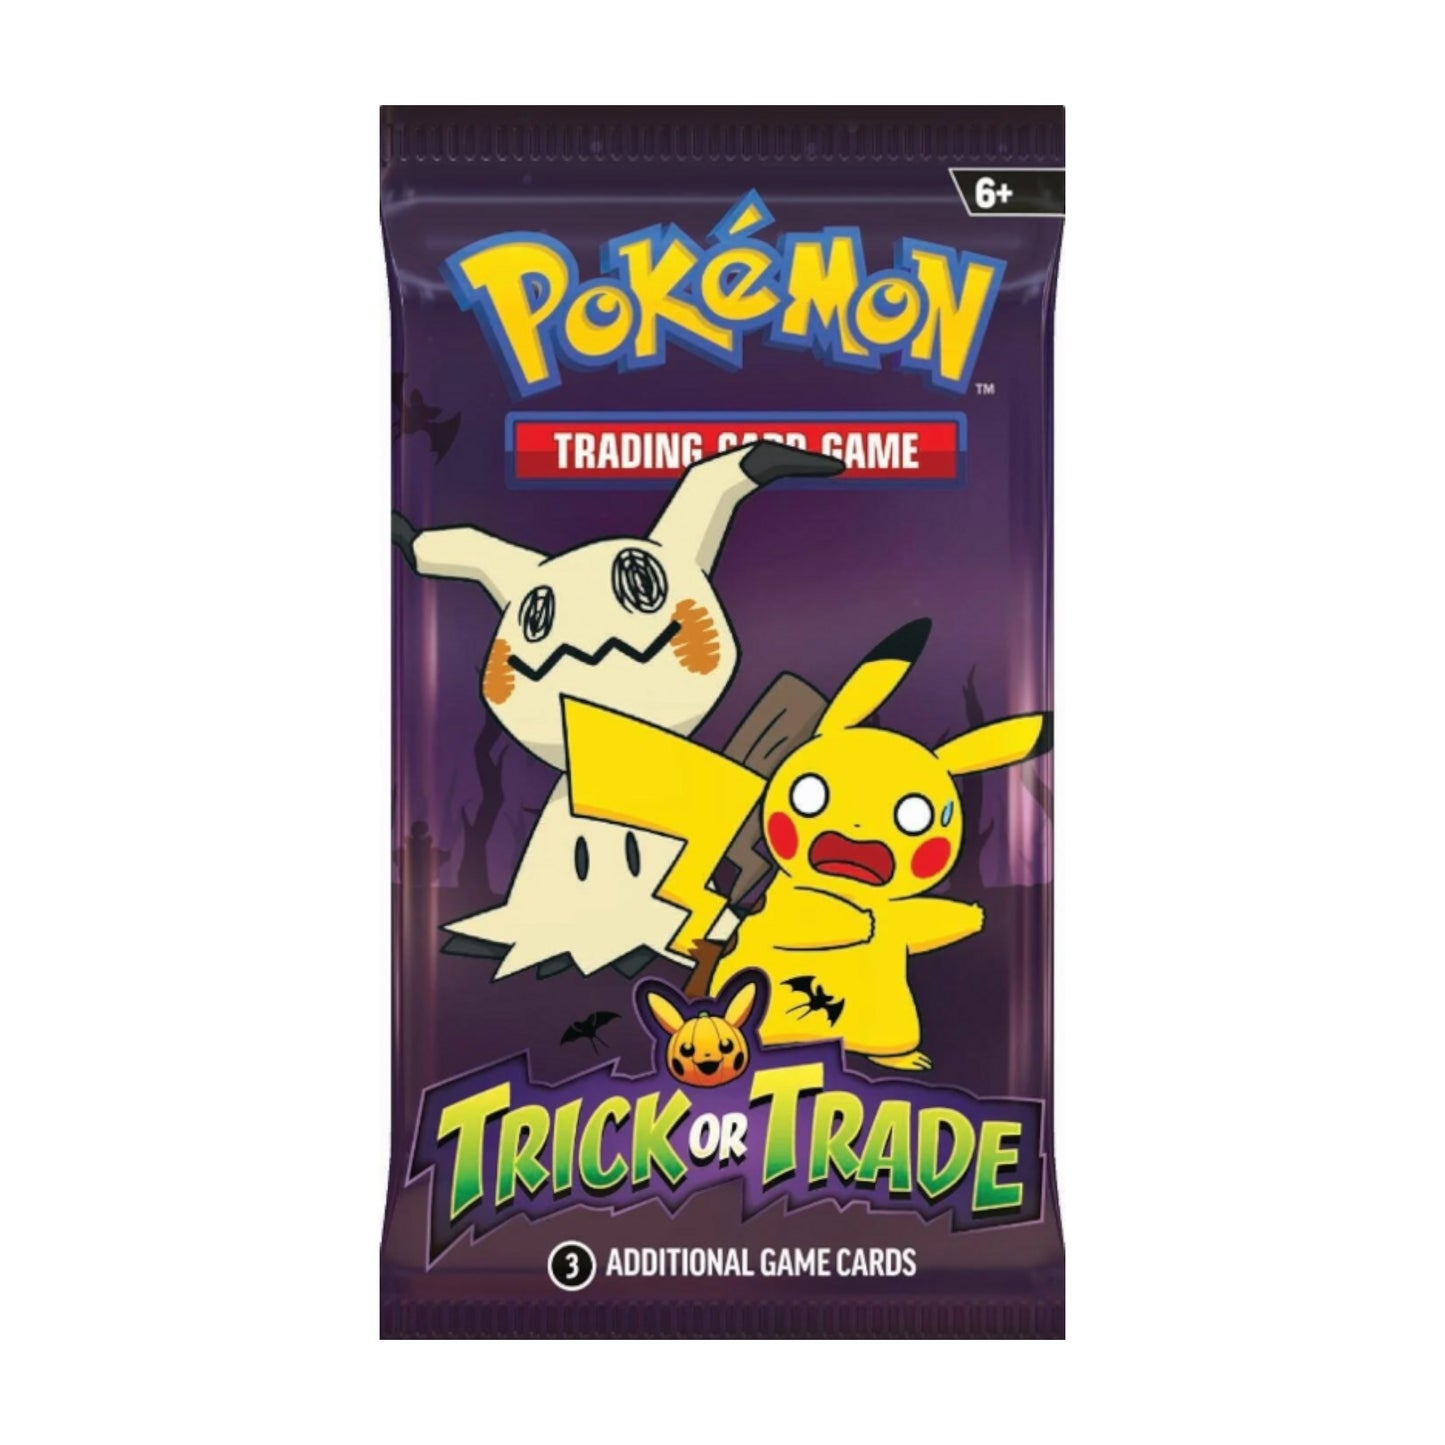 Pokémon Trading Card Game Trick or Trade (3 Pack)